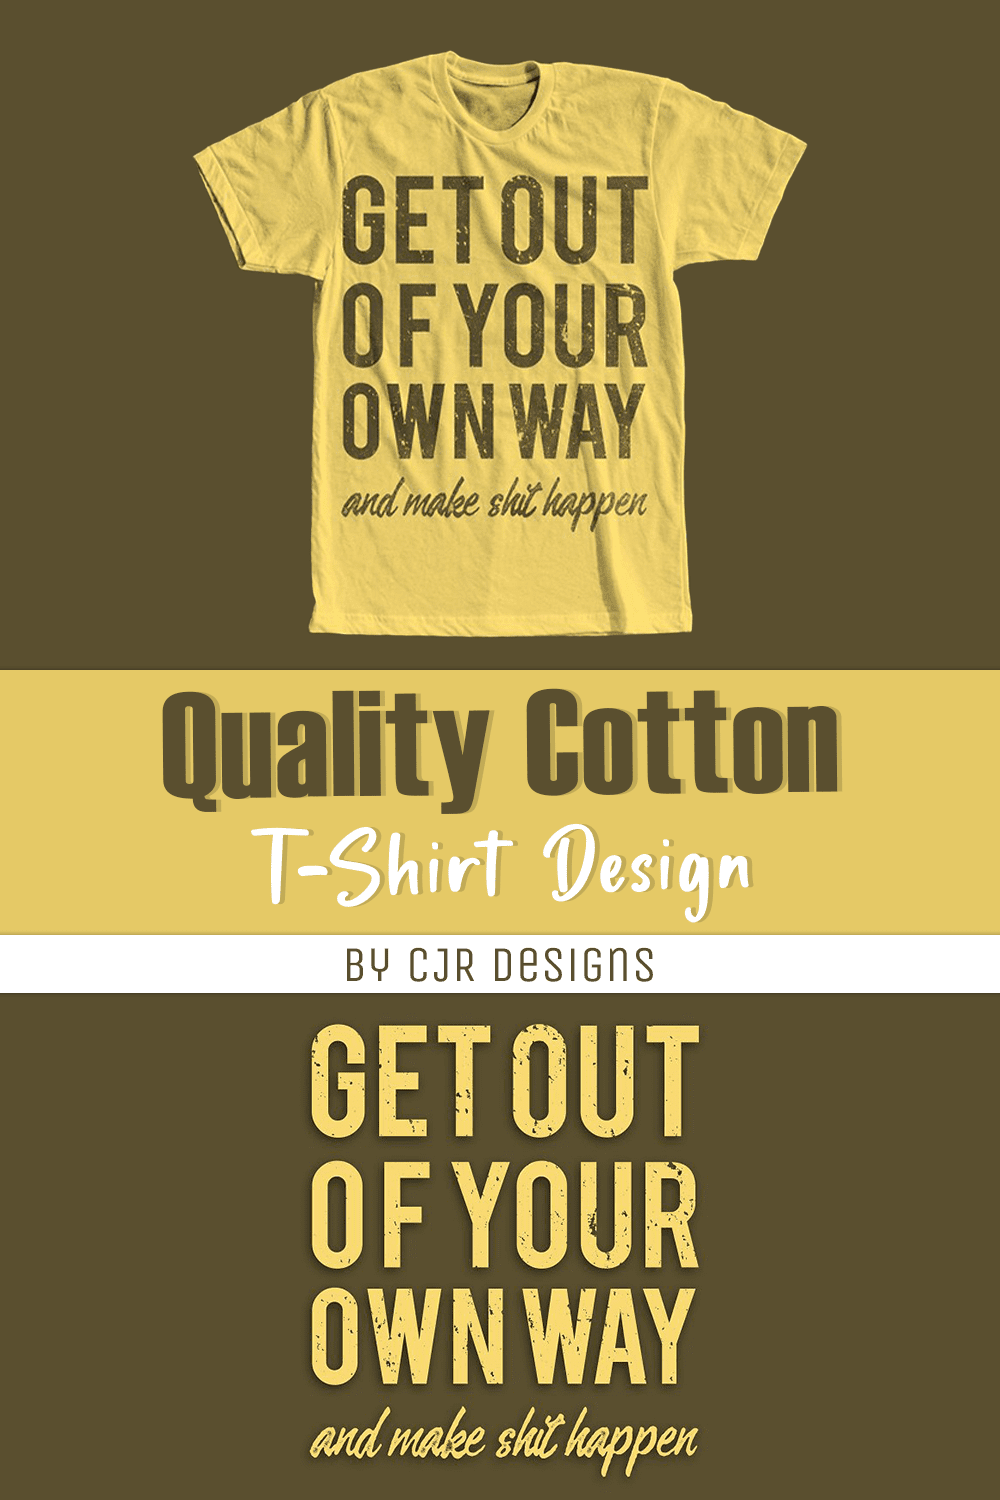 Light yellow T-shirt with charming print with motivational quote.